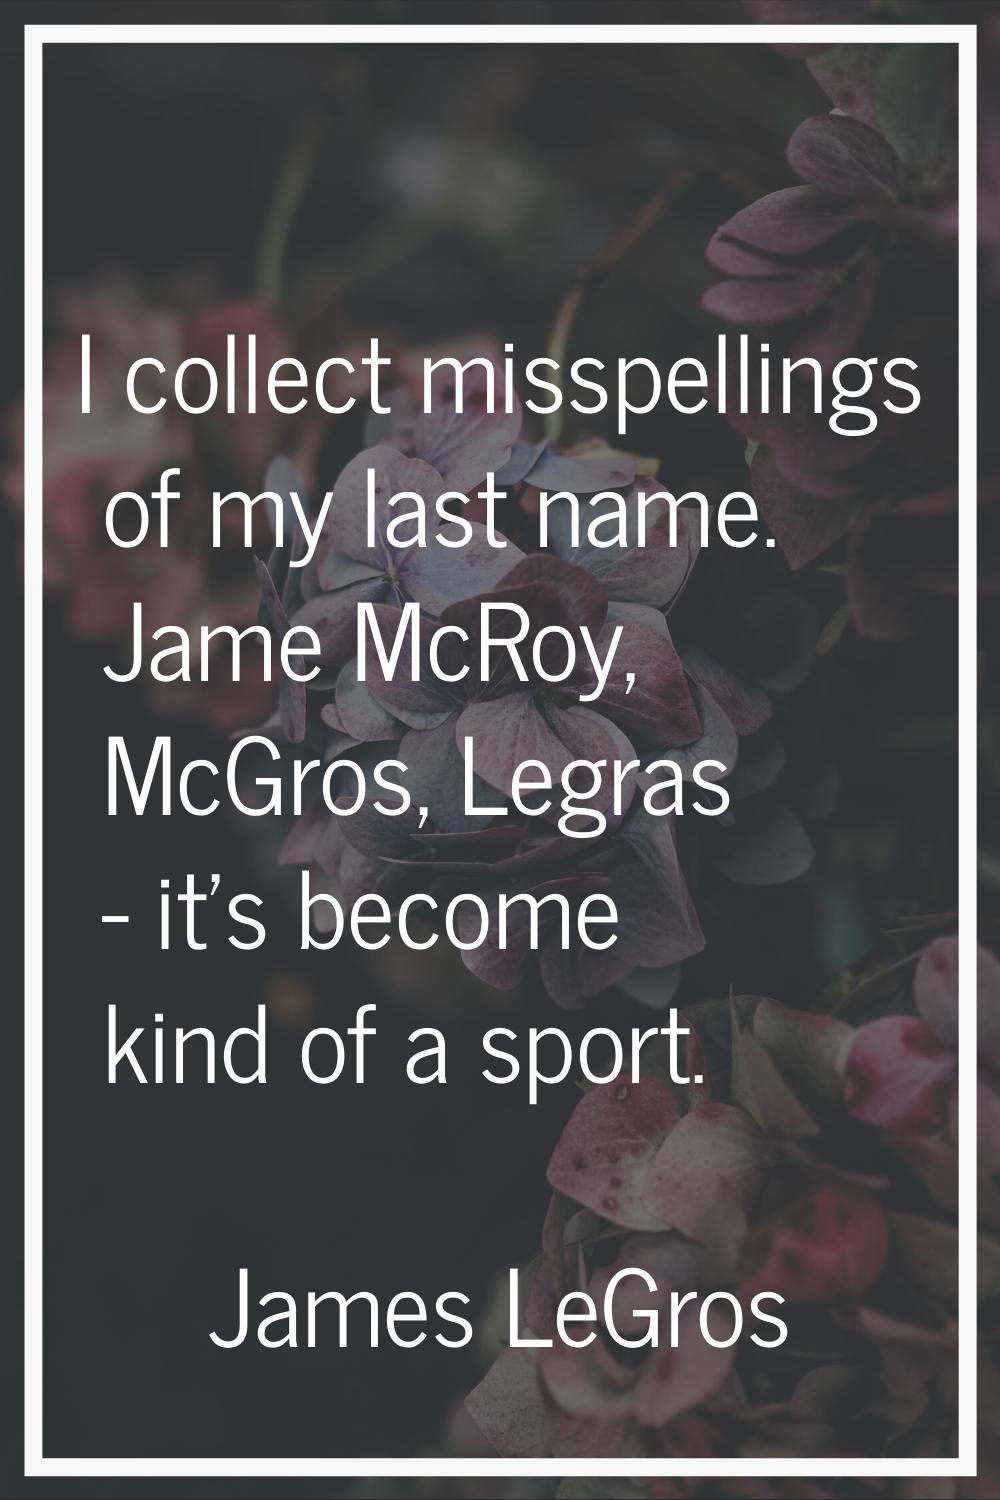 I collect misspellings of my last name. Jame McRoy, McGros, Legras - it's become kind of a sport.